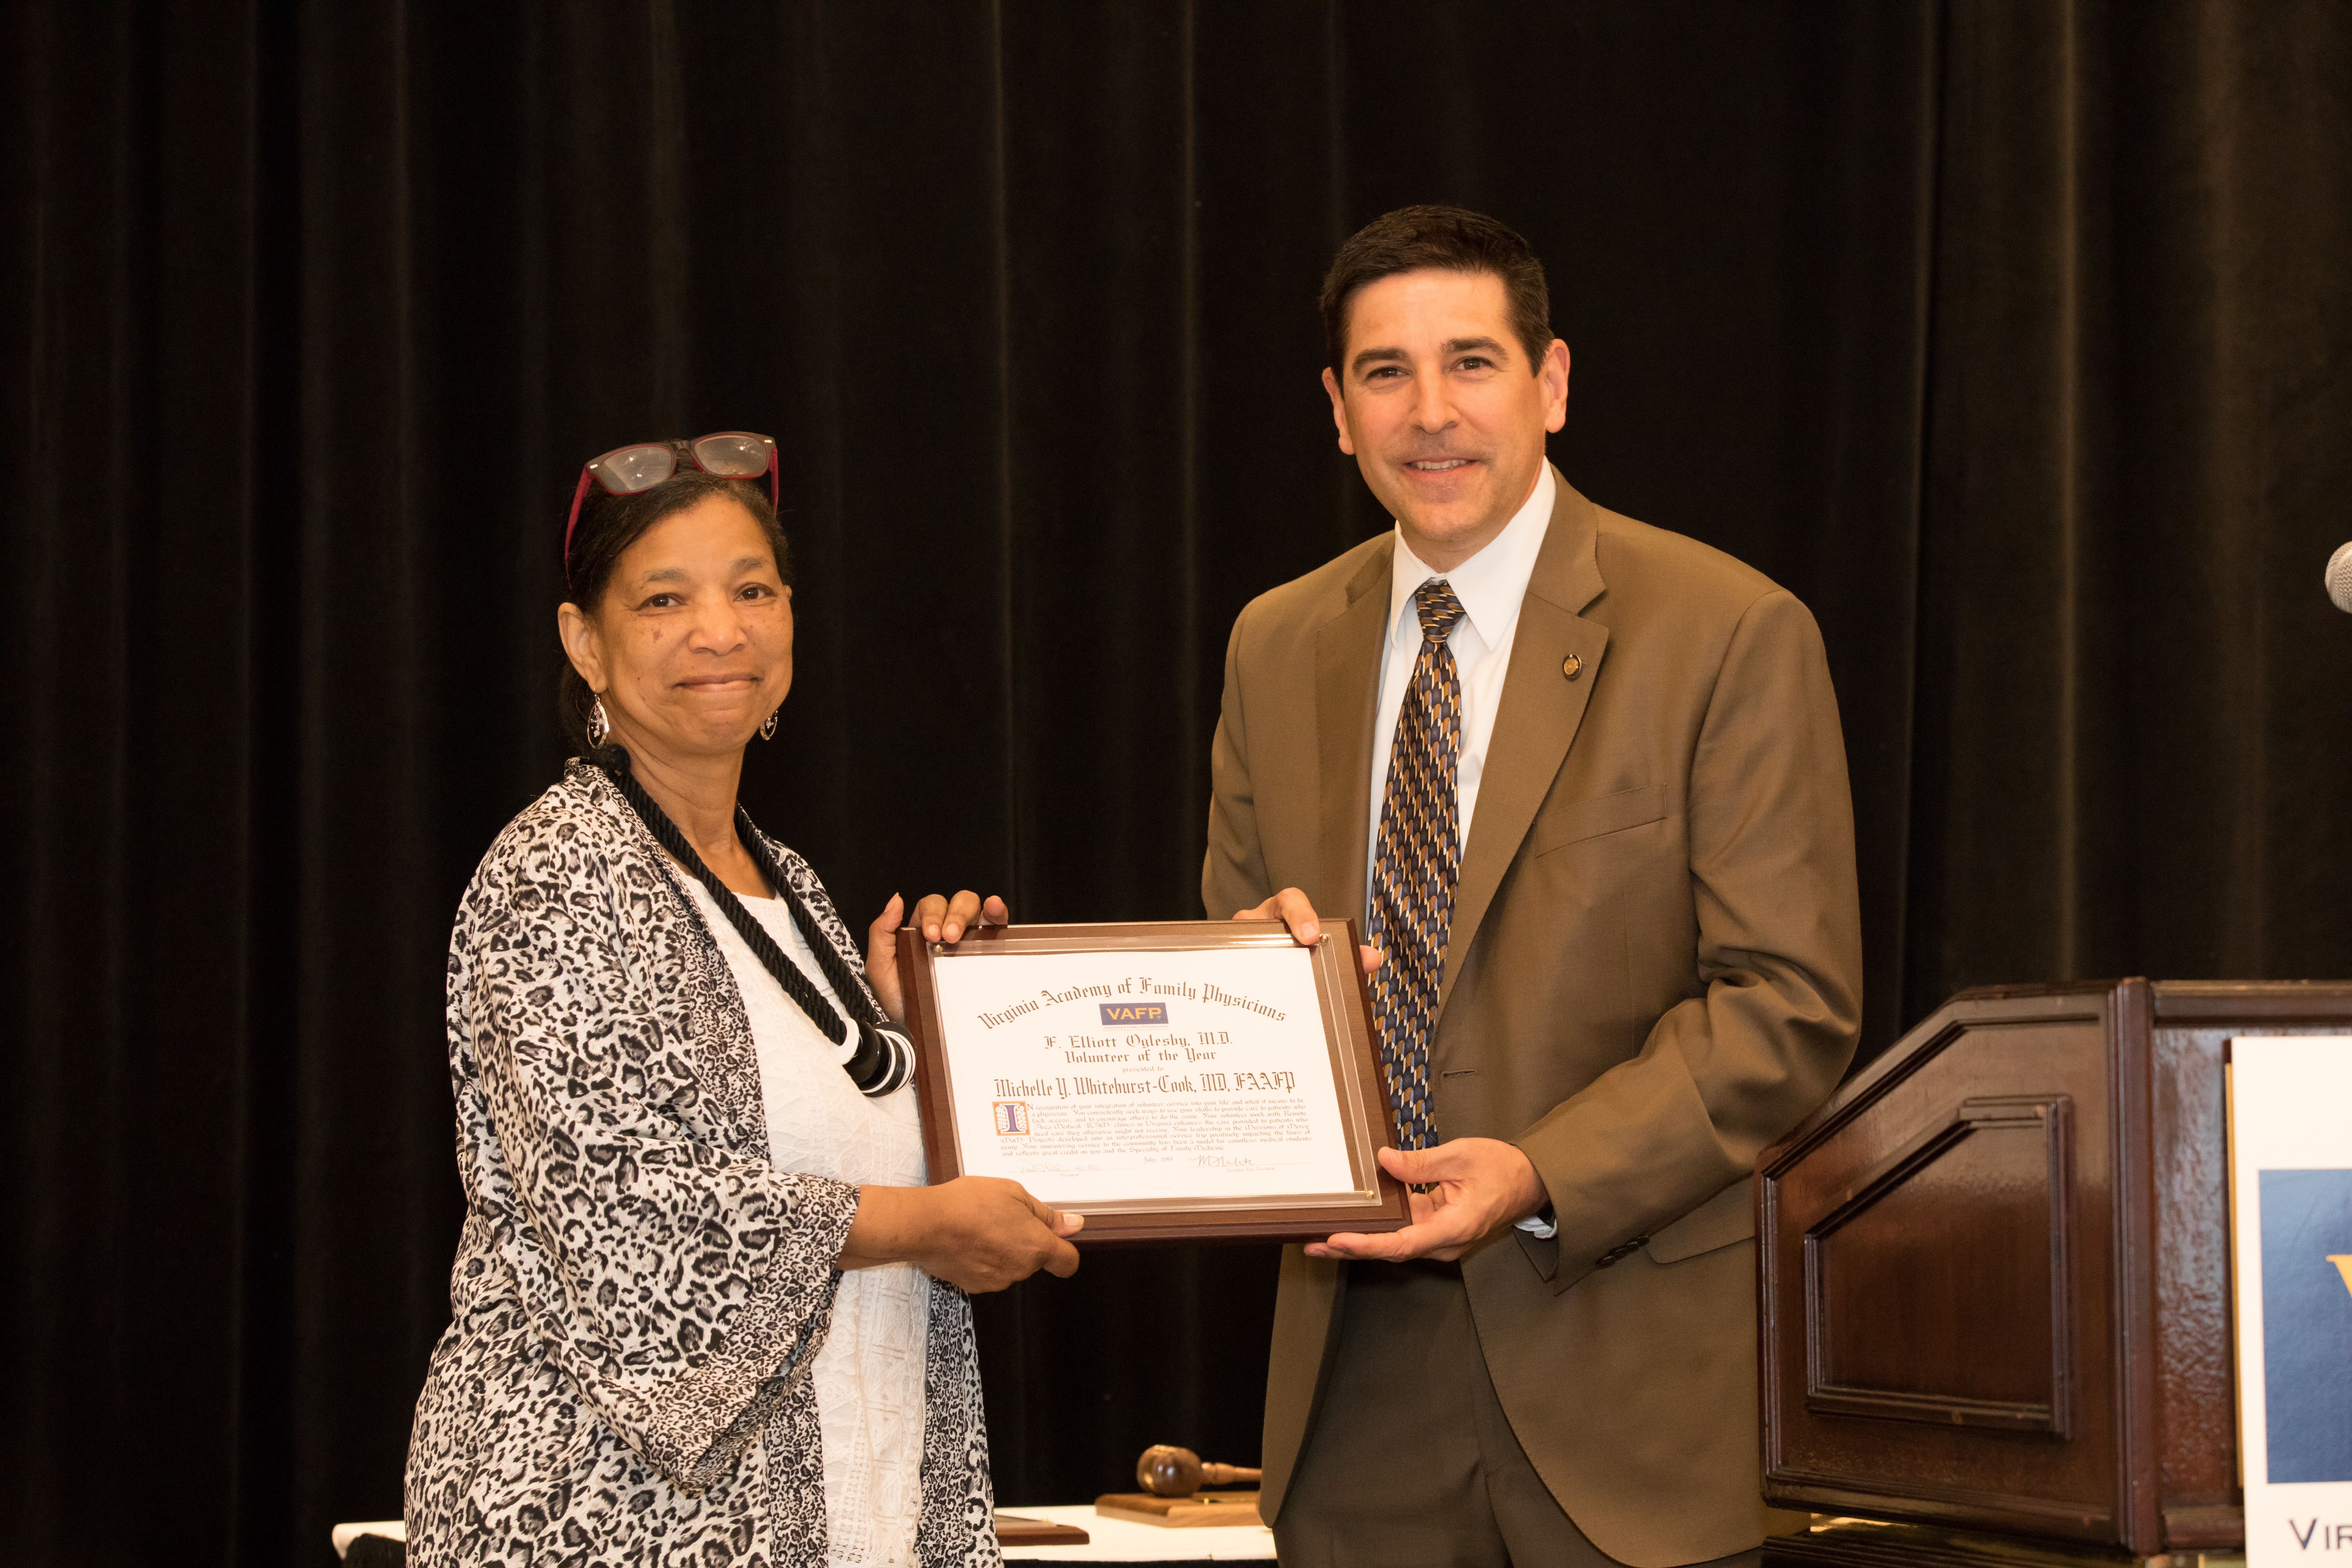 Dr. Michelle Whitehurst-Cook accepting the F. Elliott Oglesby, MD Volunteer of the Year Award for 2019